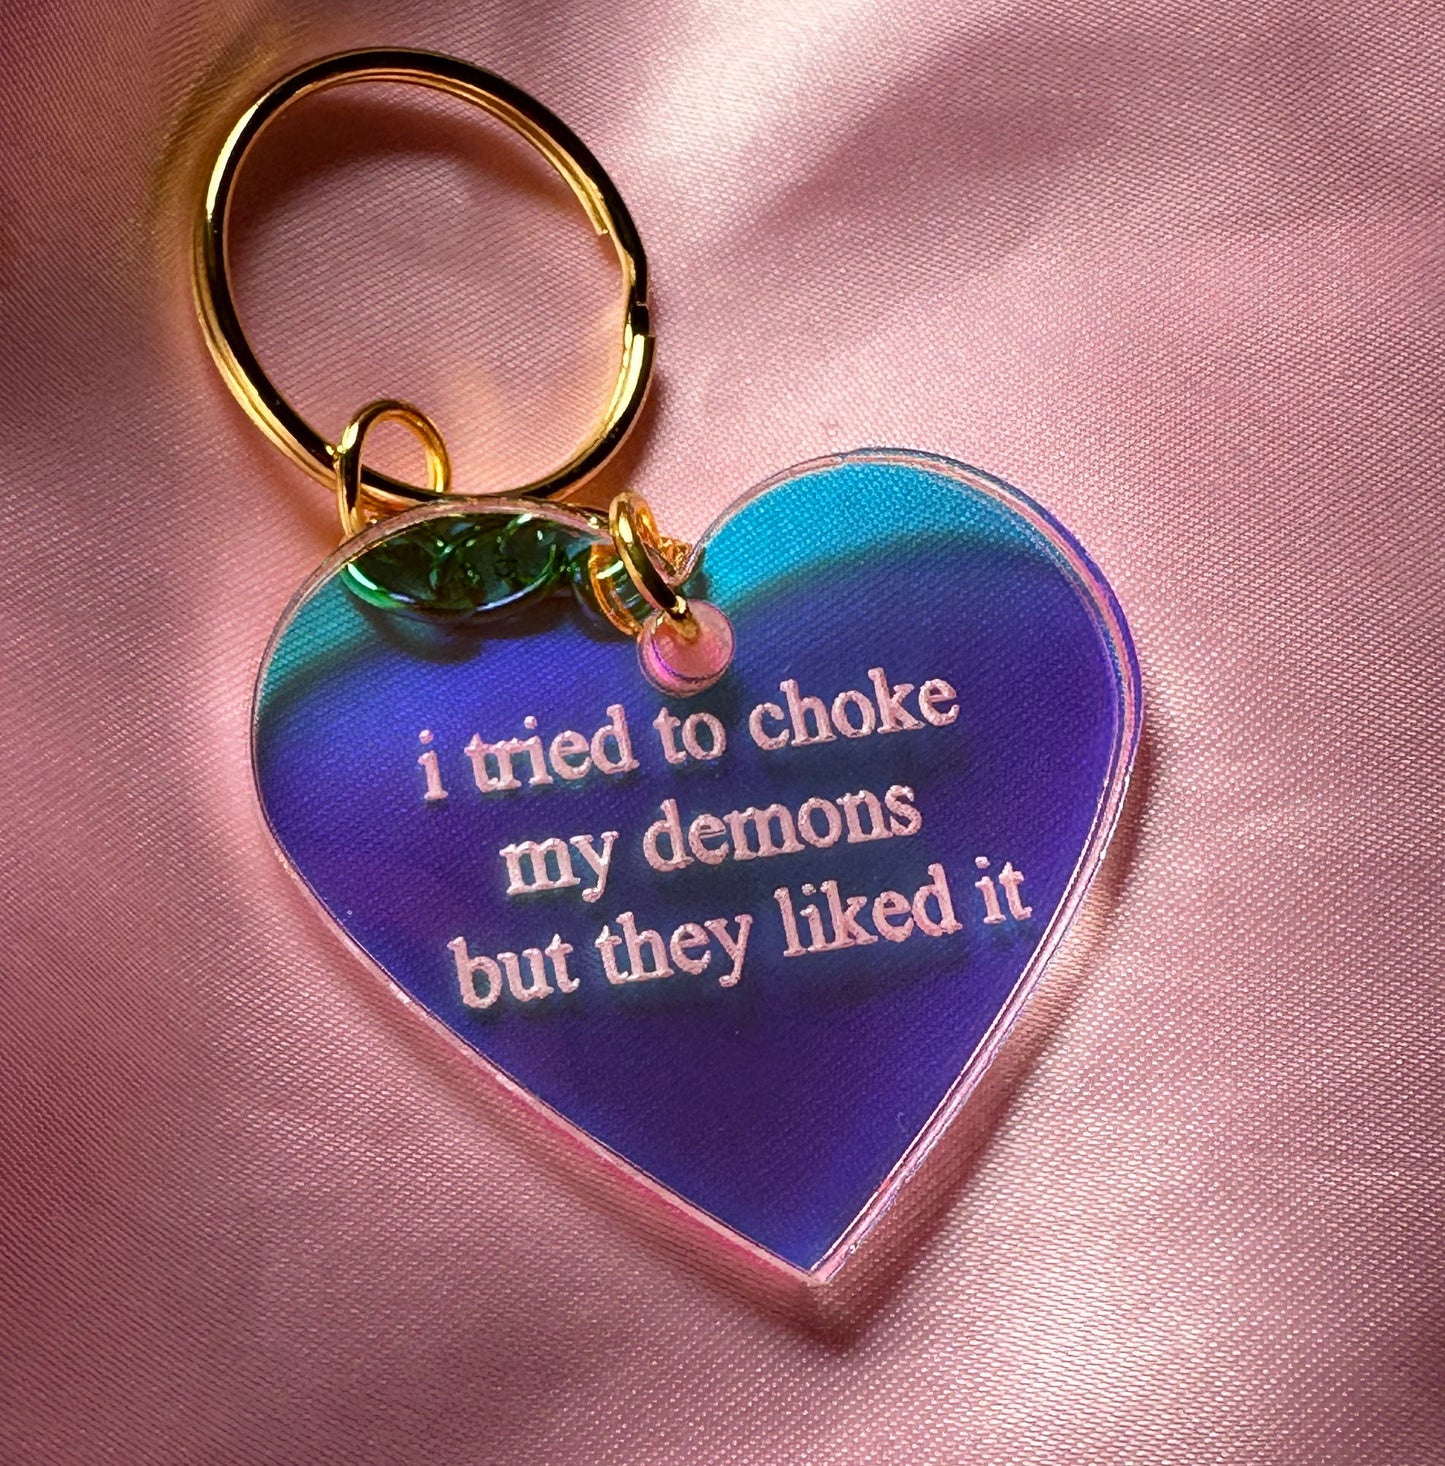 Made To Order I tried to choke my demons but they liked it Iridescent Acrylic Keychain